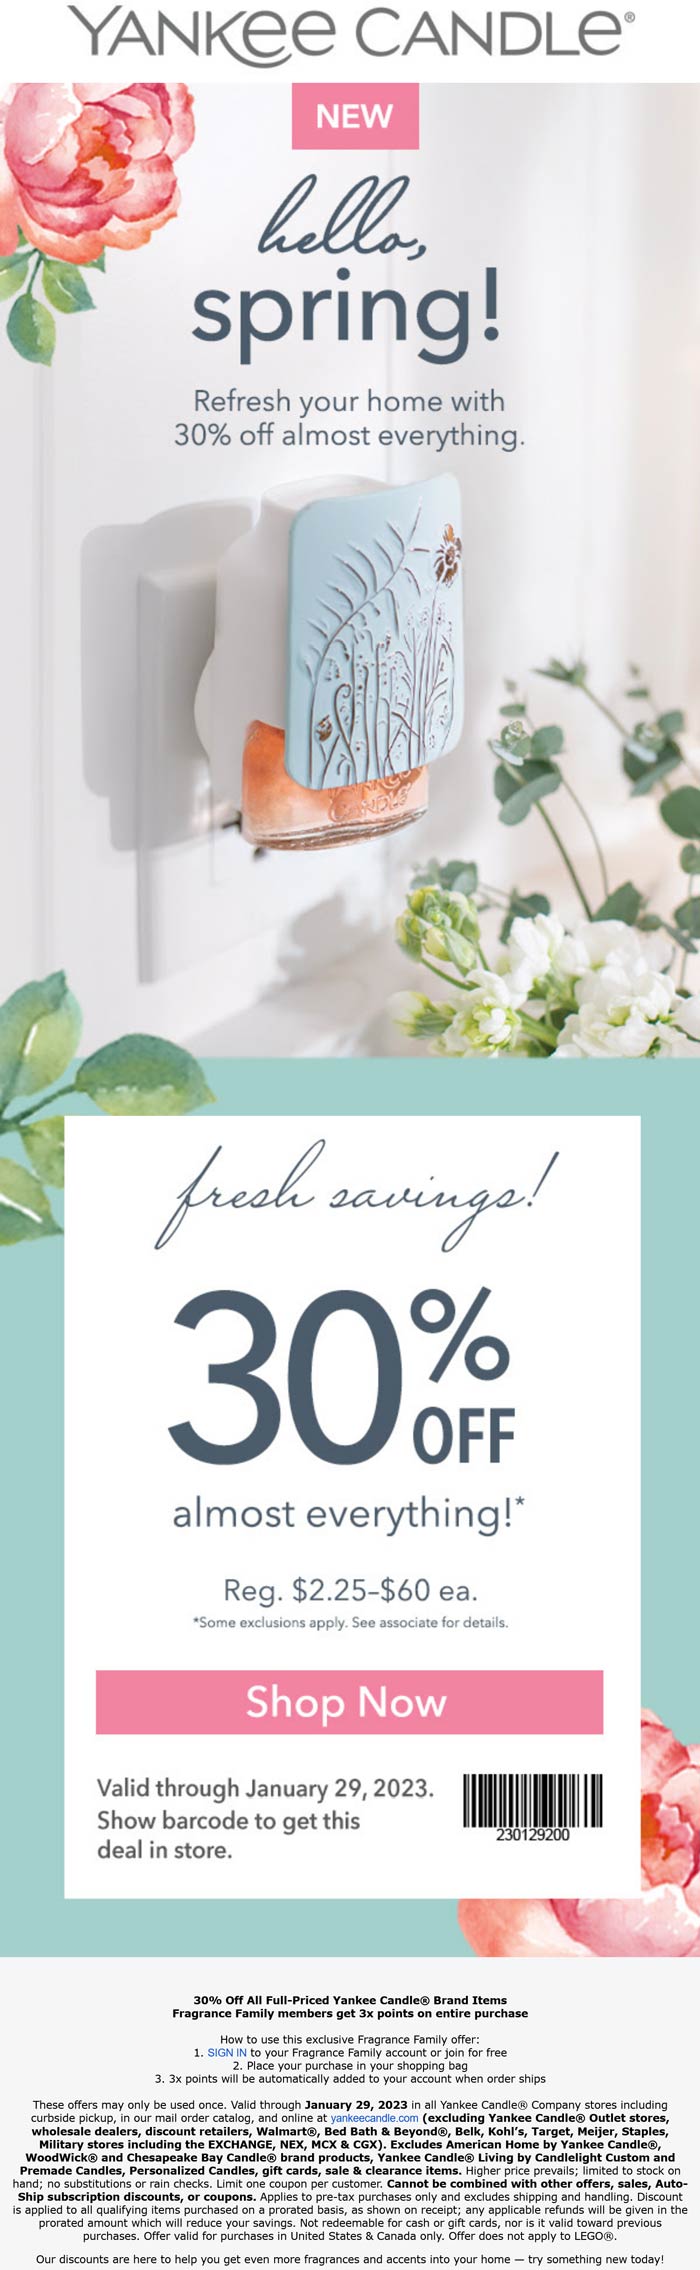 Yankee Candle stores Coupon  30% off at Yankee Candle, ditto online #yankeecandle 